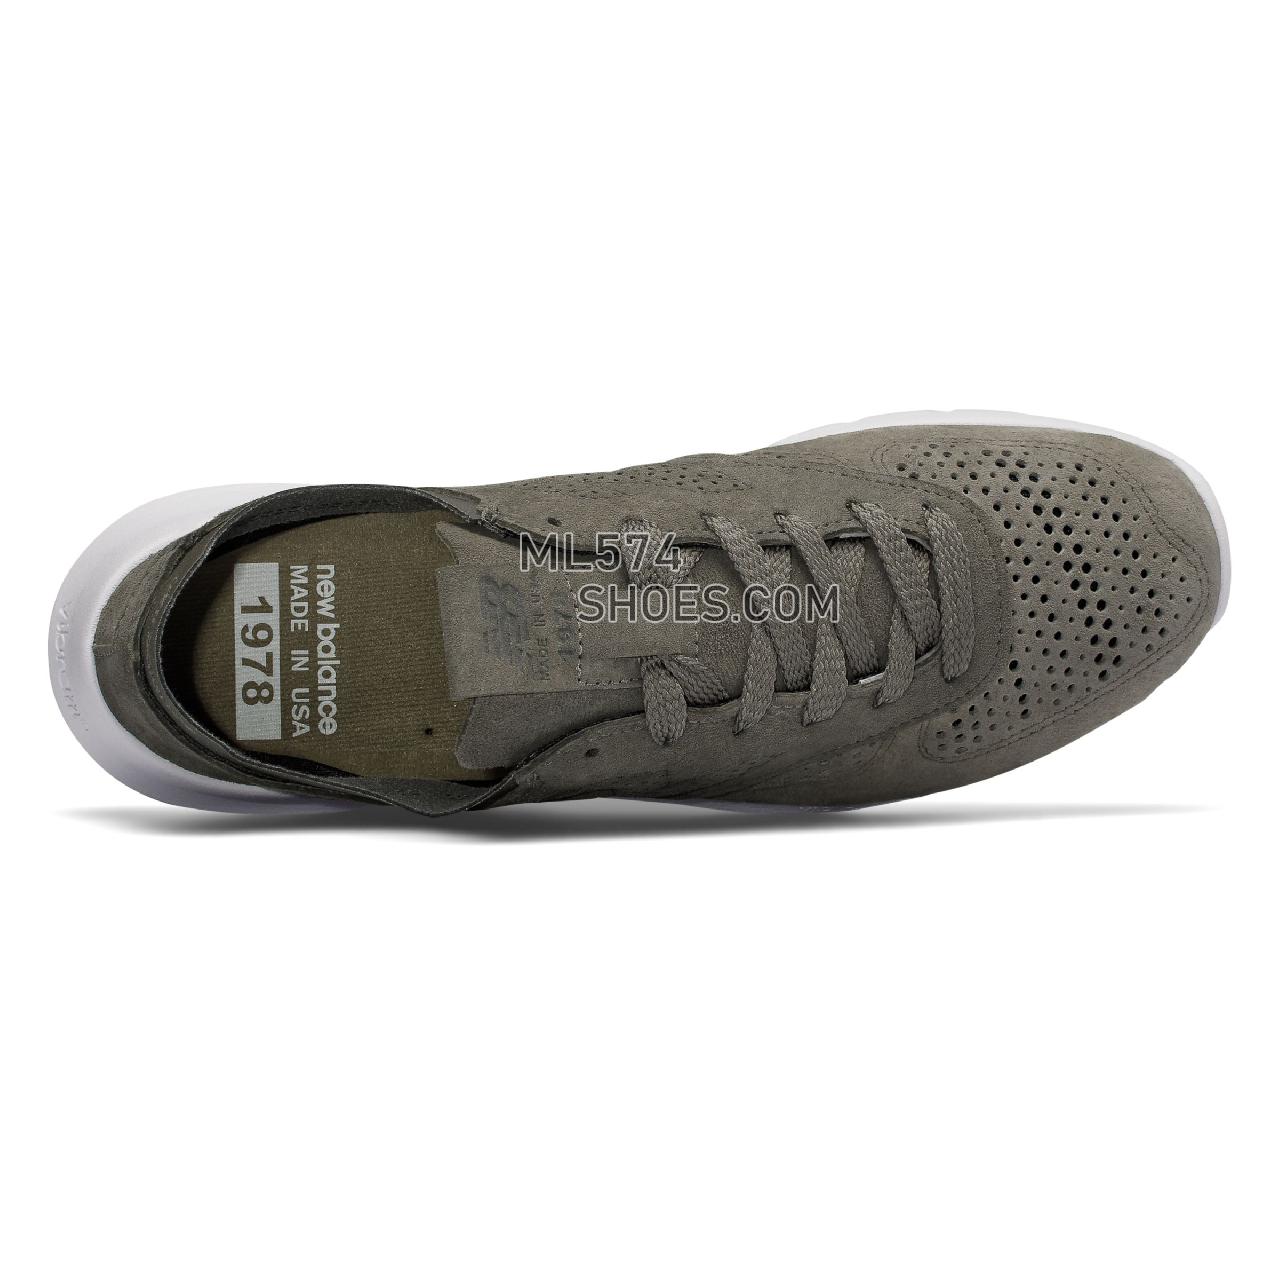 New Balance 1978 Made in US - Men's 1978 - Classic Military Urban Grey with Military Foliage Green - ML1978CN